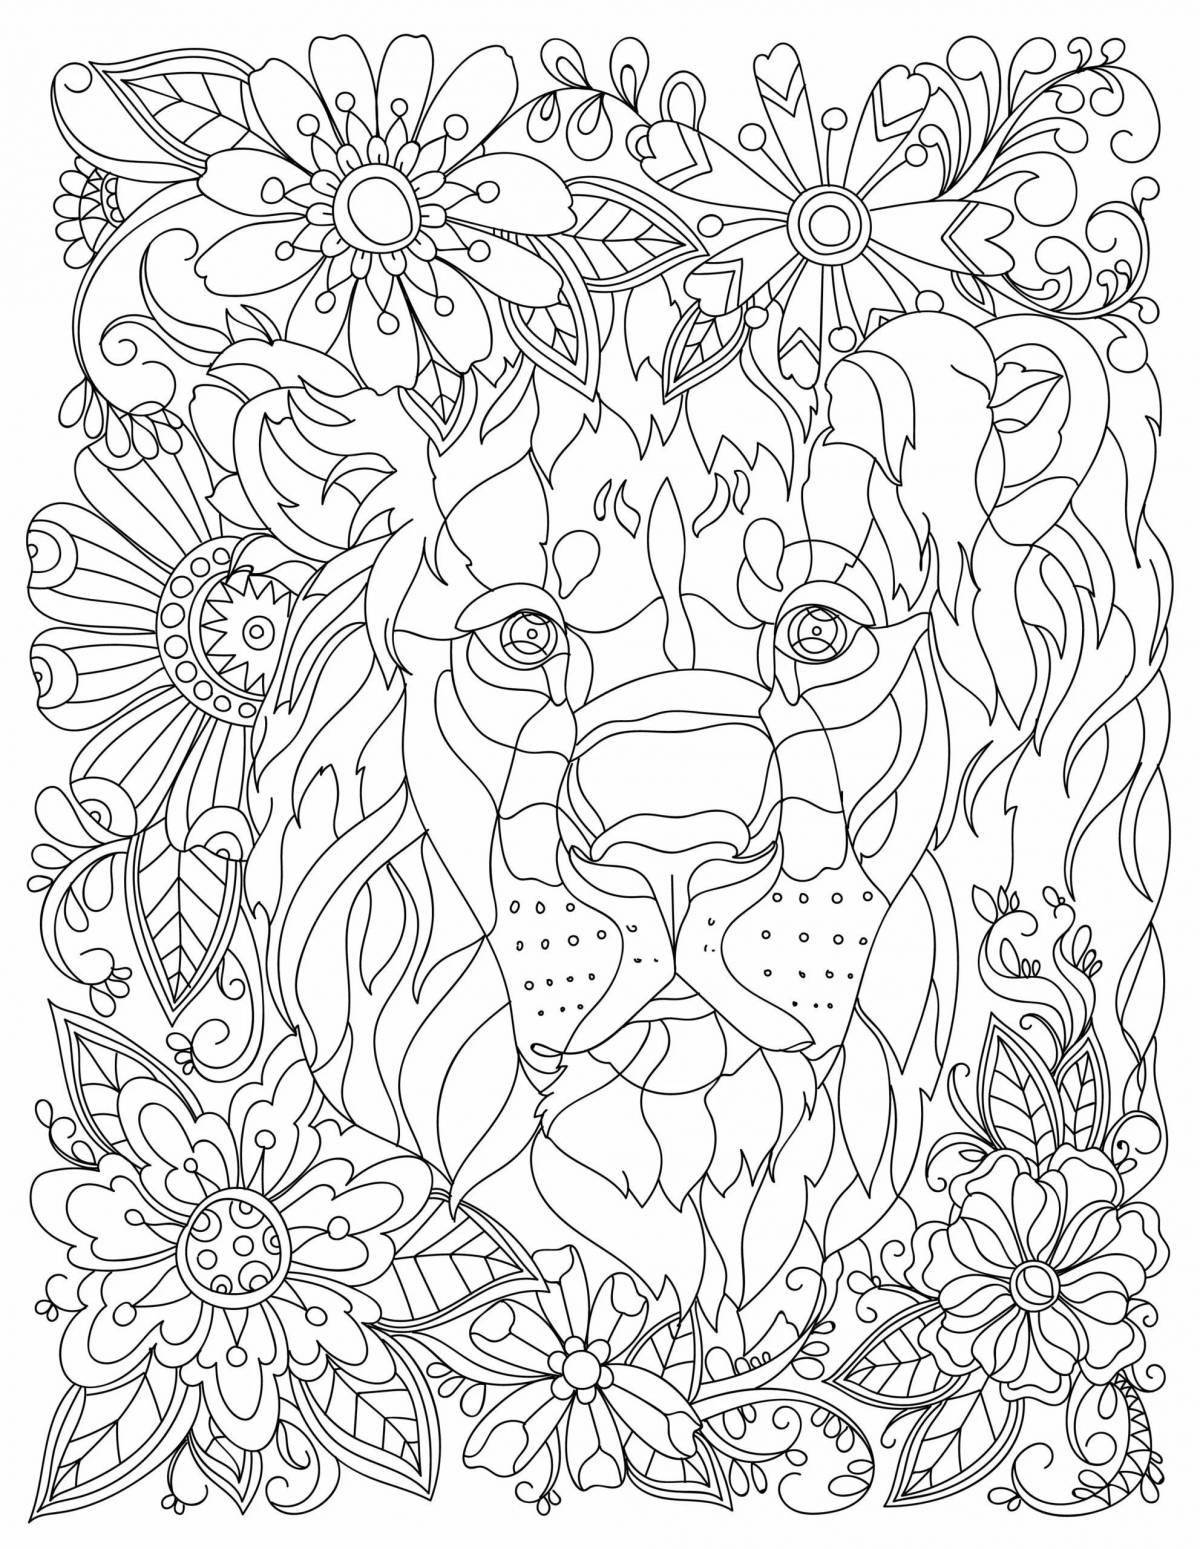 Fun coloring page of nerves